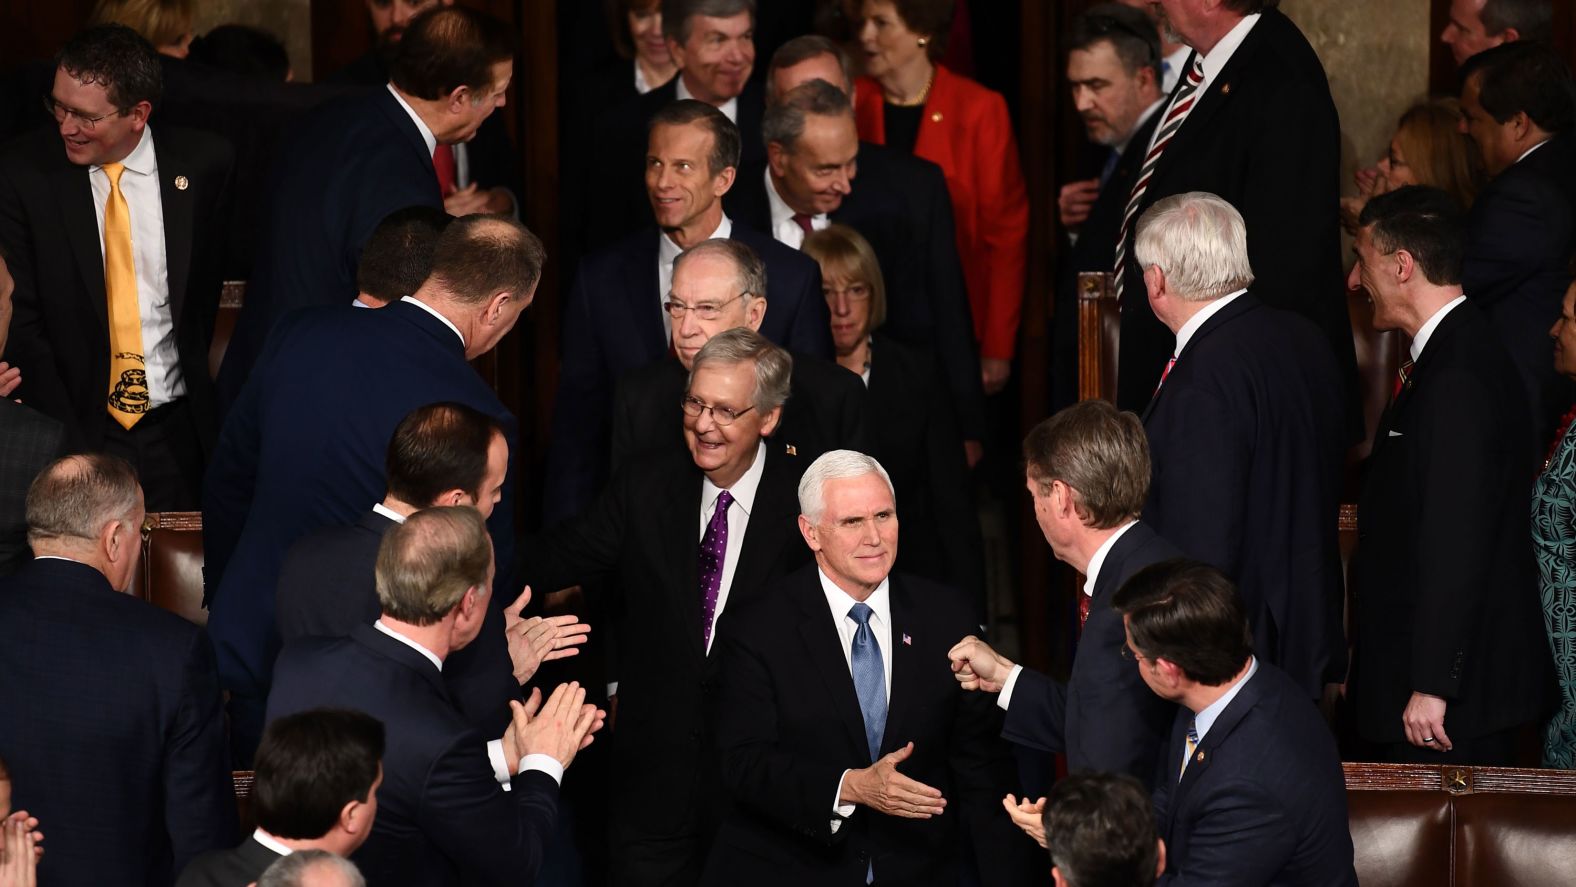 Pence and Senate Majority Leader Mitch McConnell greet members of the House as they walk into the chamber.